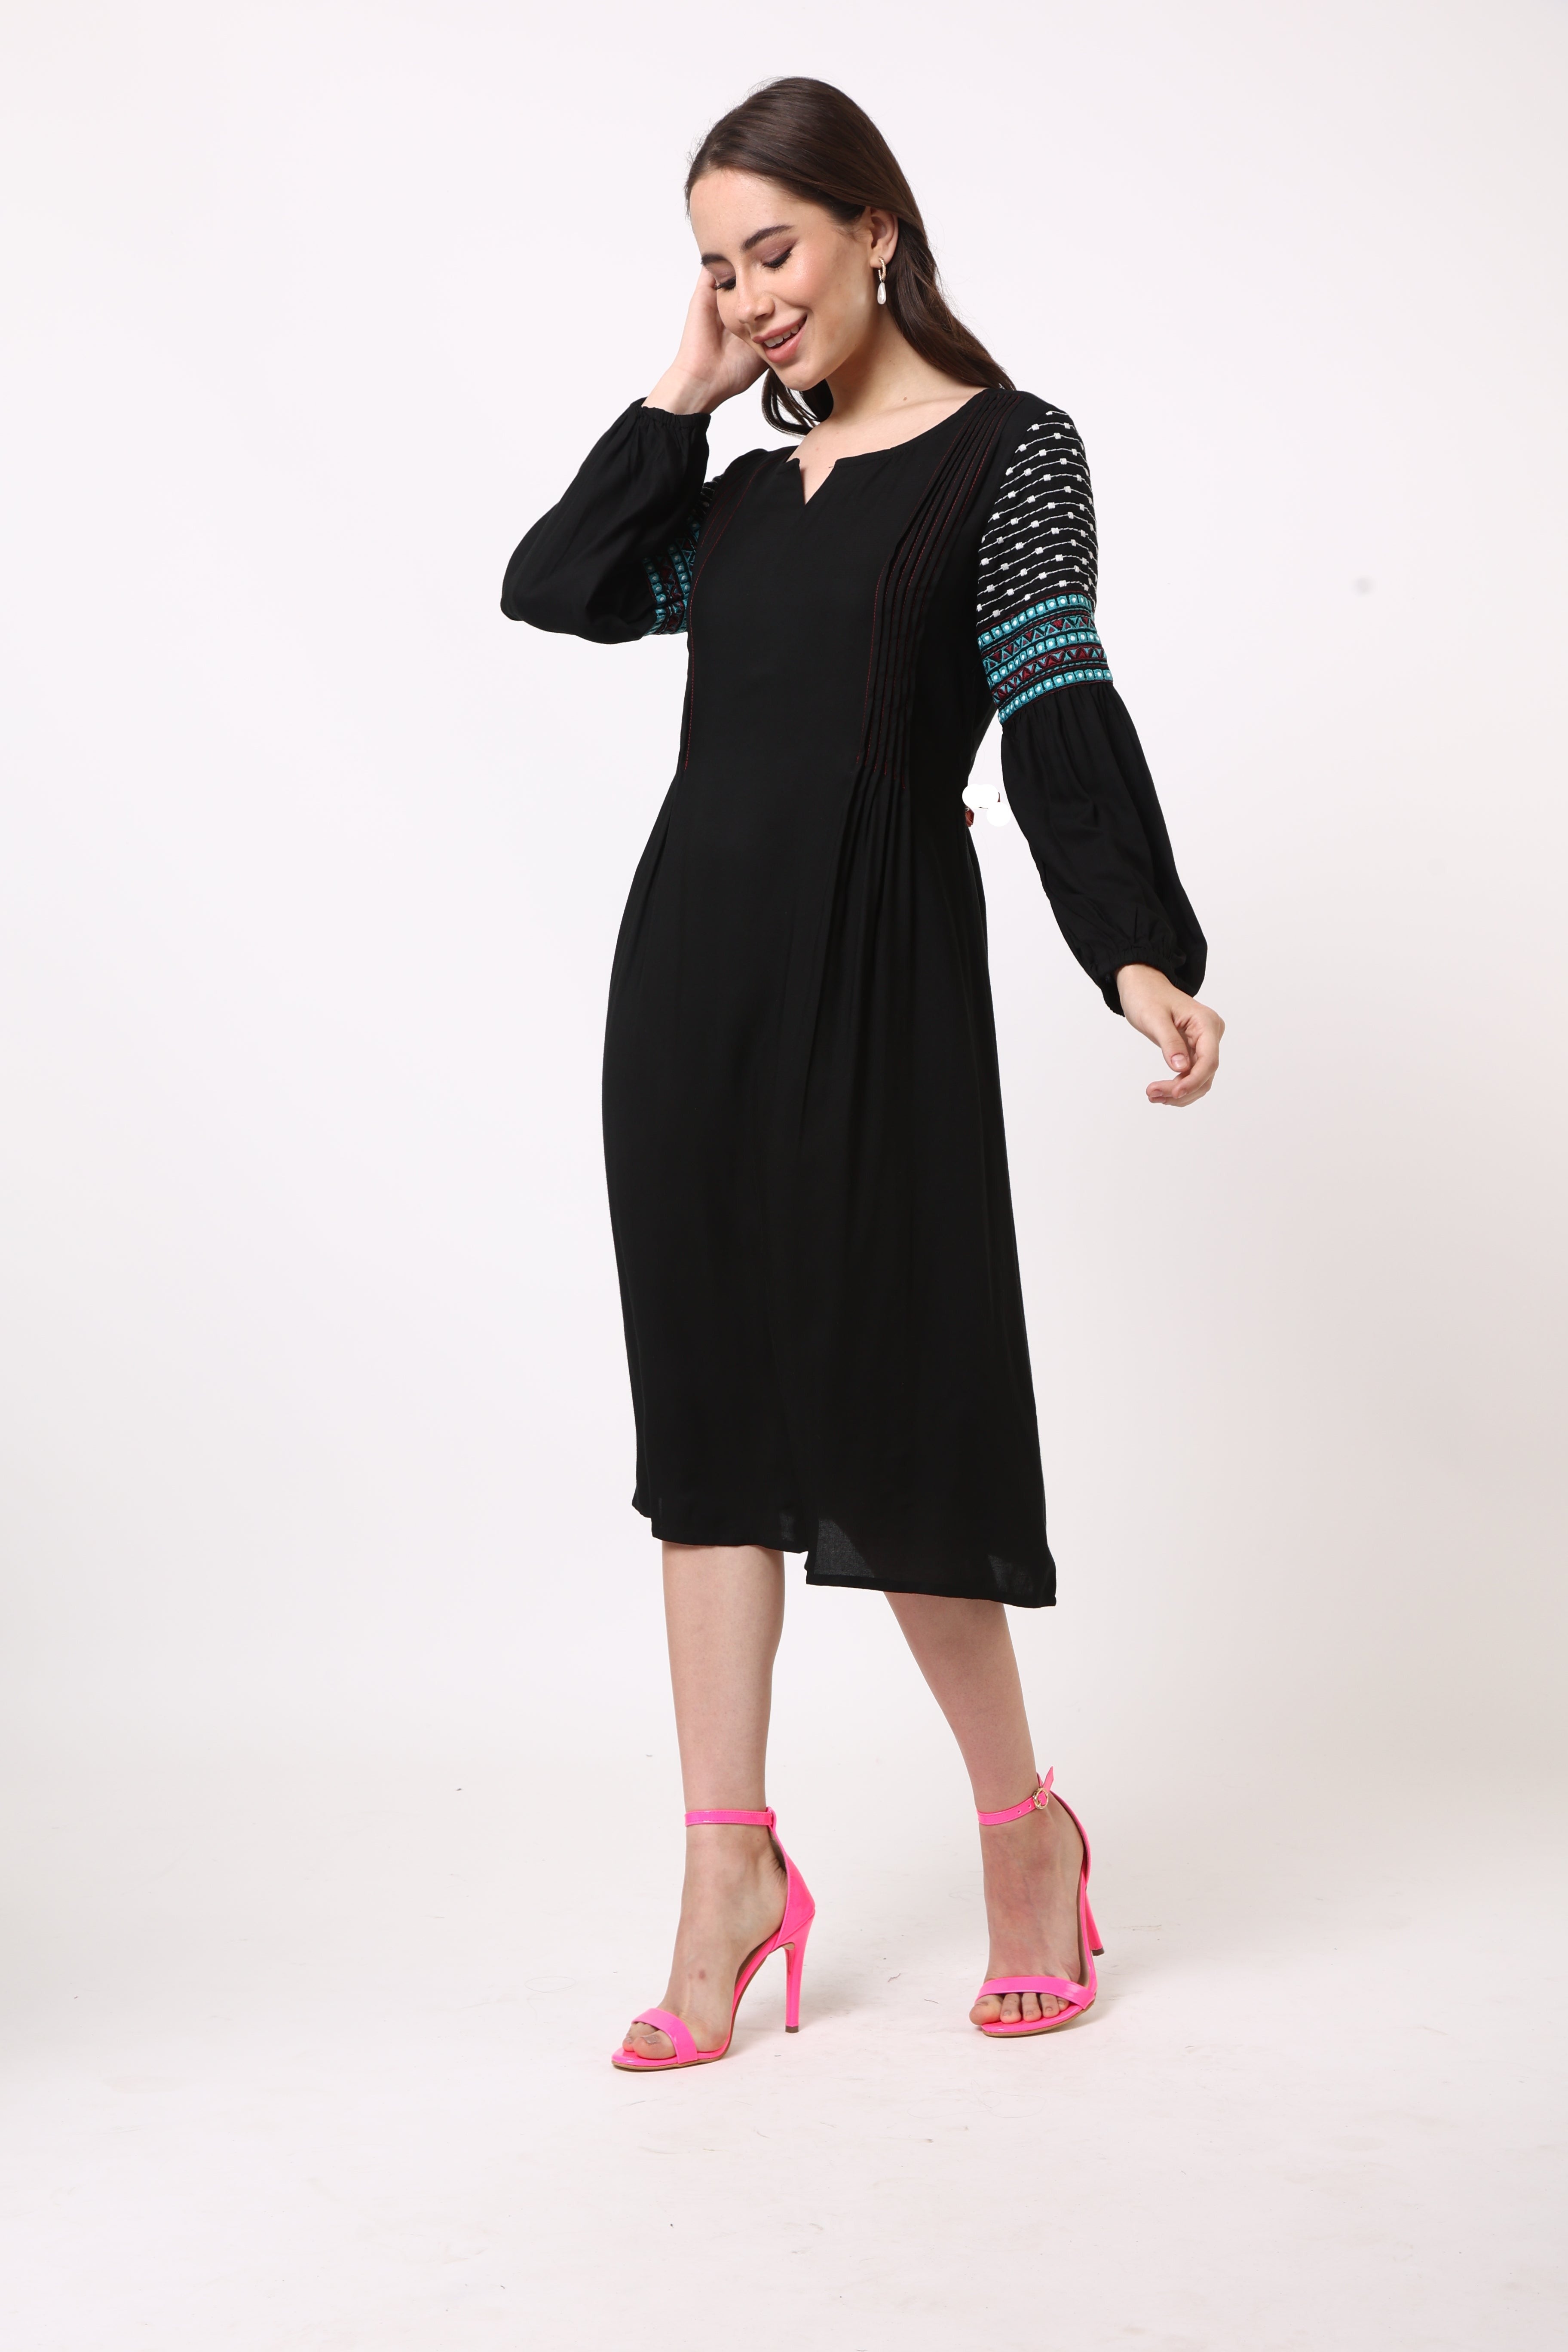 Black Dress With Embroidered Sleeves